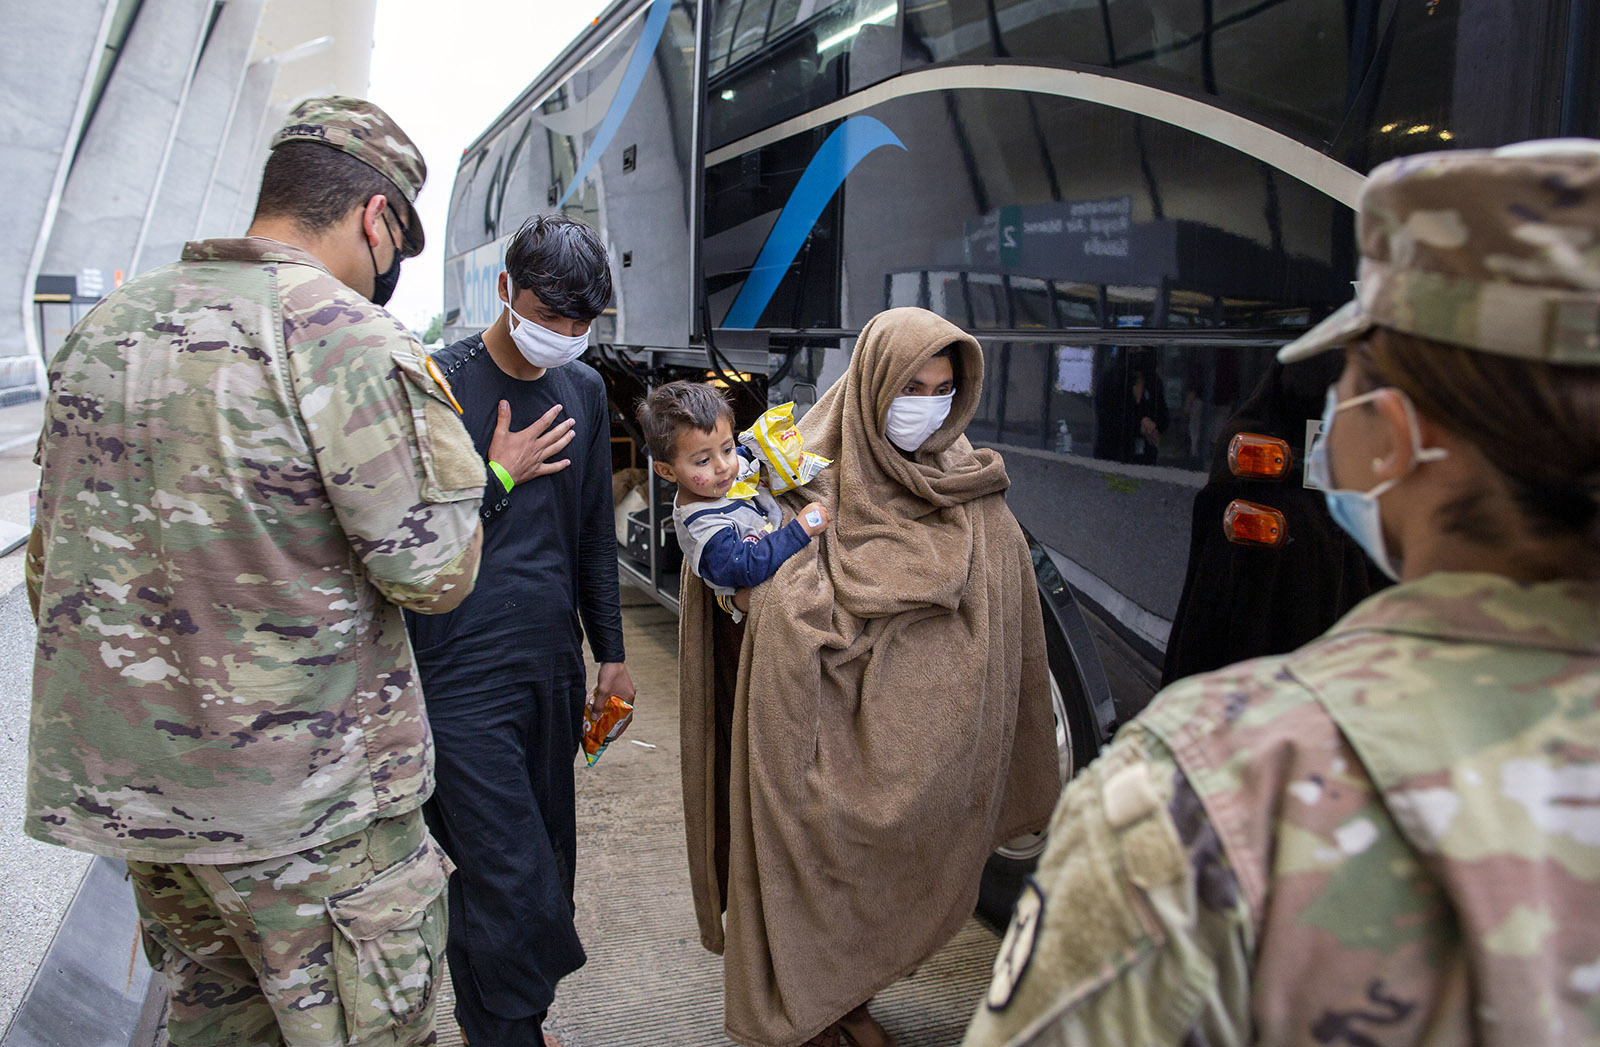 People evacuated from Kabul, Afghanistan, are greeted by U.S. service members at Washington Dulles International Airport, in Chantilly, Virginia, on Sept. 1, 2021. (AP Photo/Gemunu Amarasinghe)